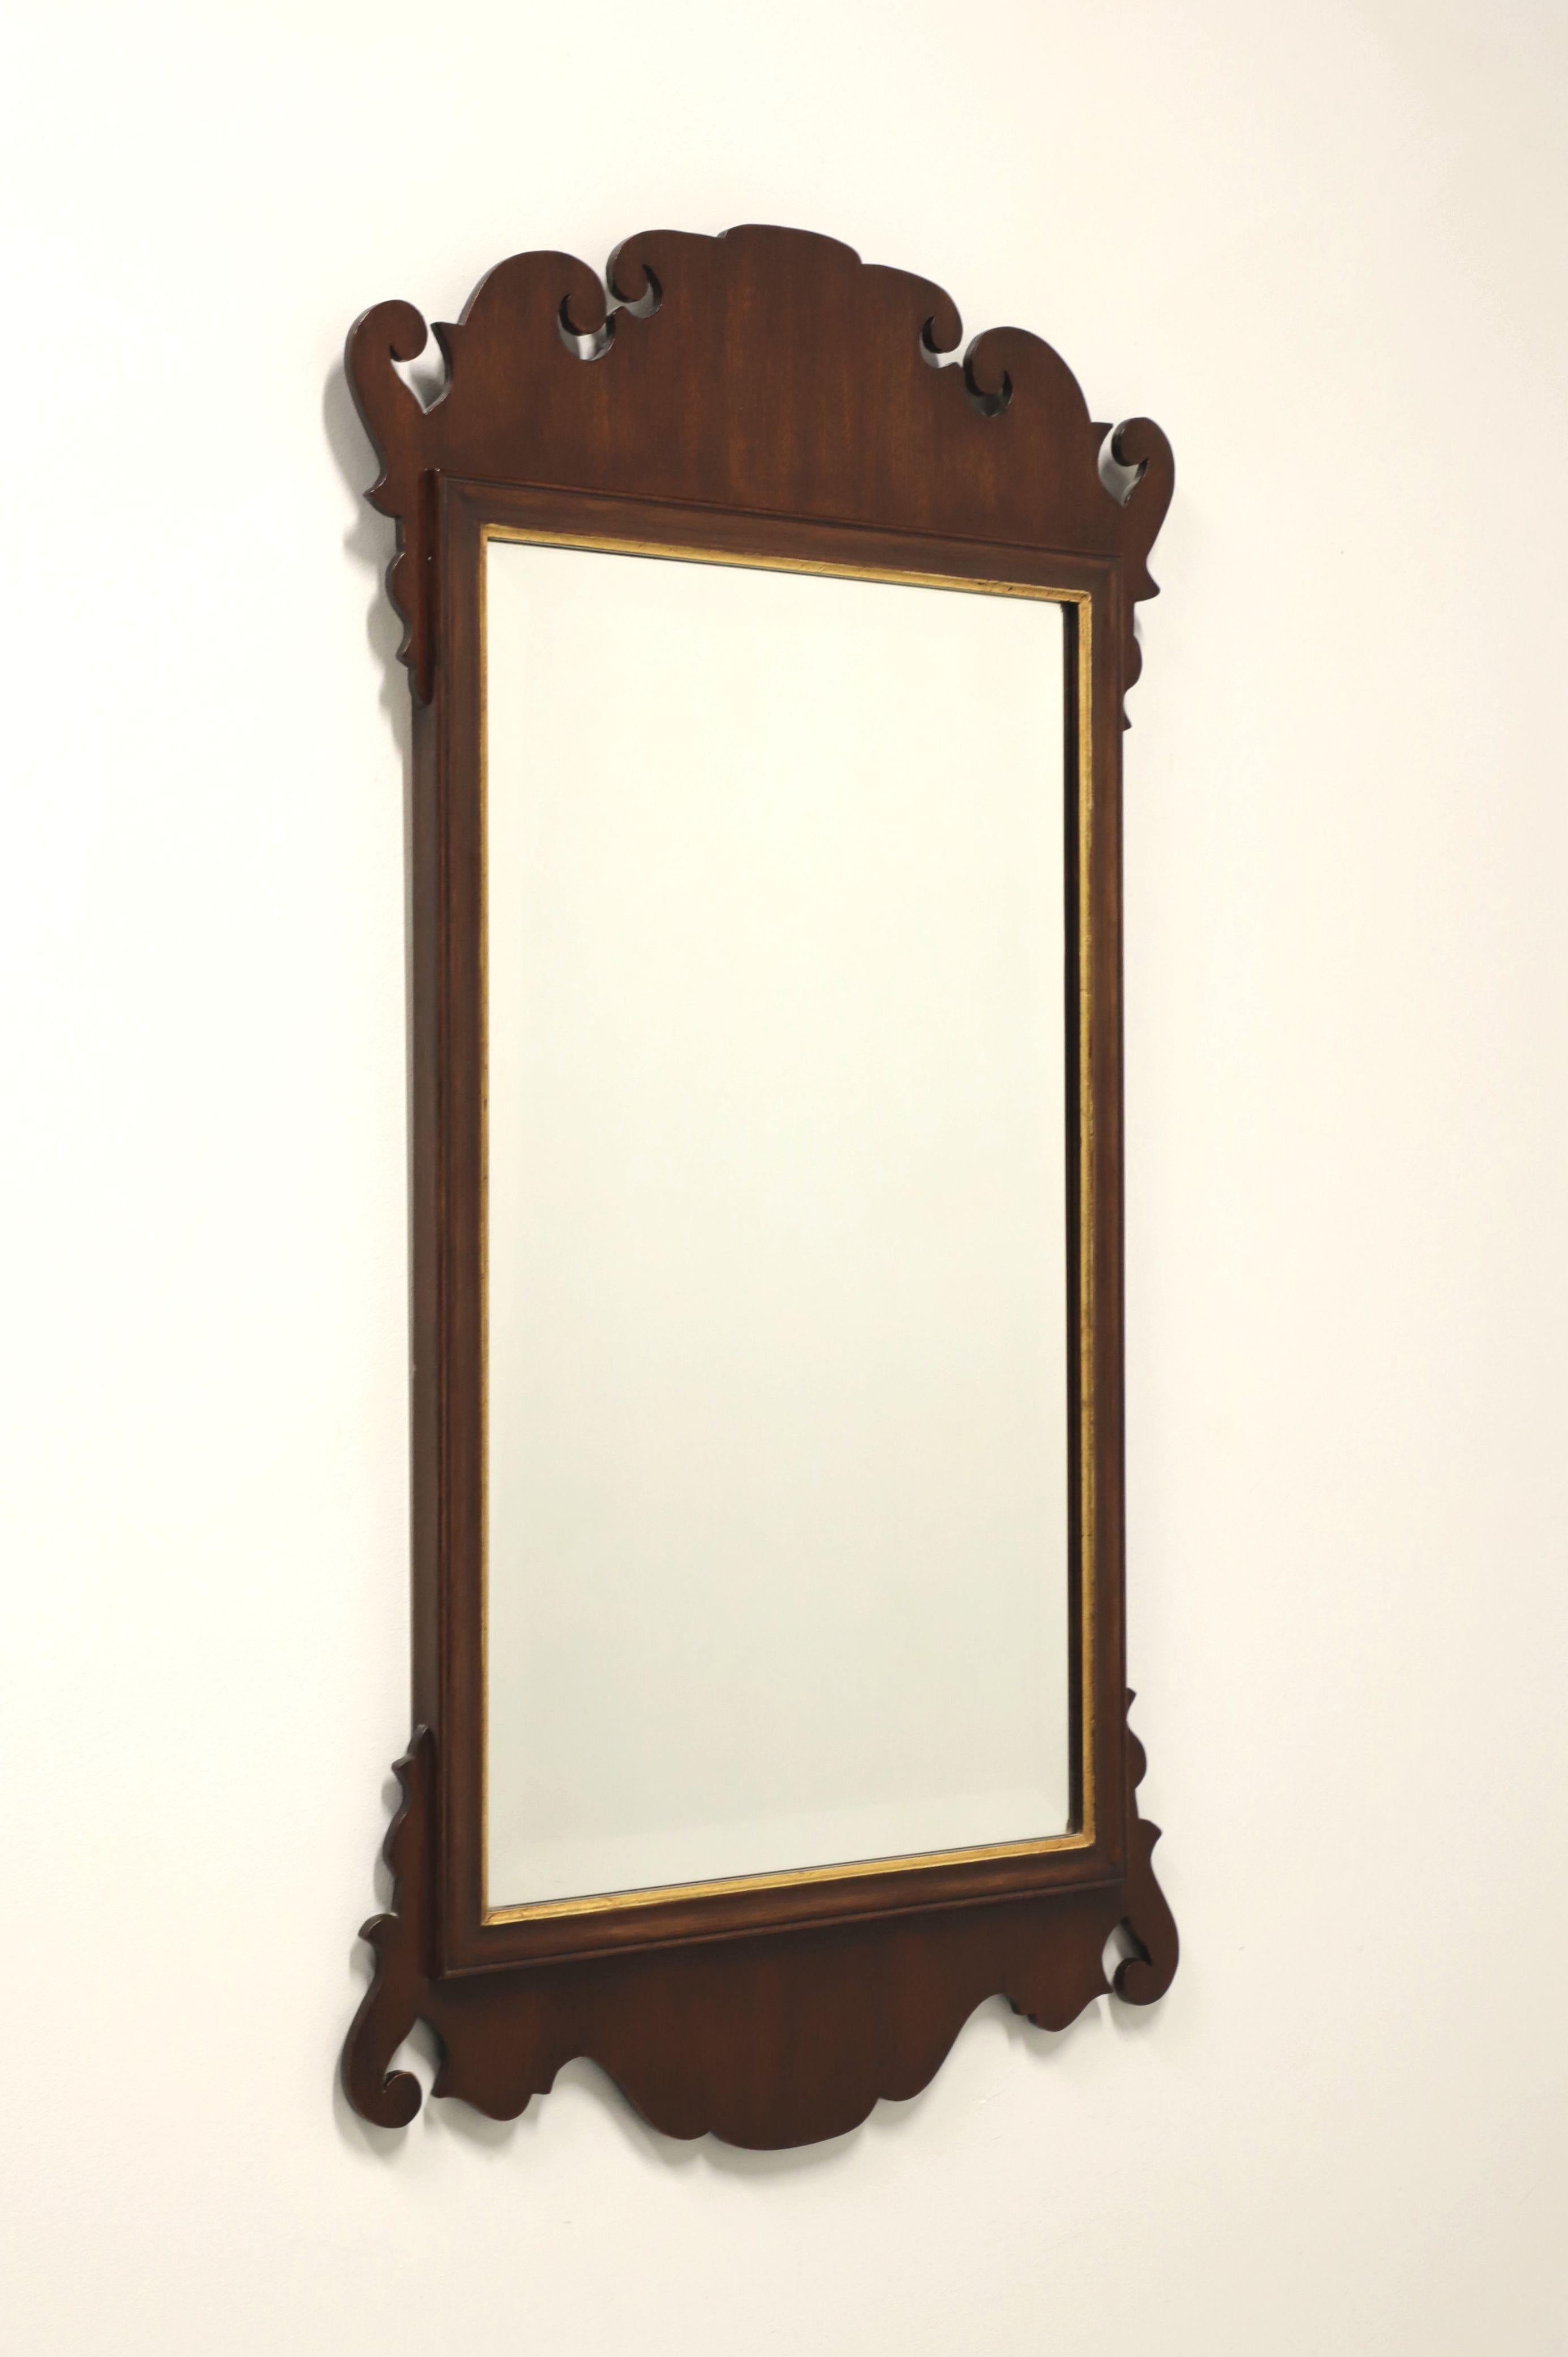 FRIEDMAN BROTHERS Mahogany Chippendale Style Beveled Wall Mirror 4